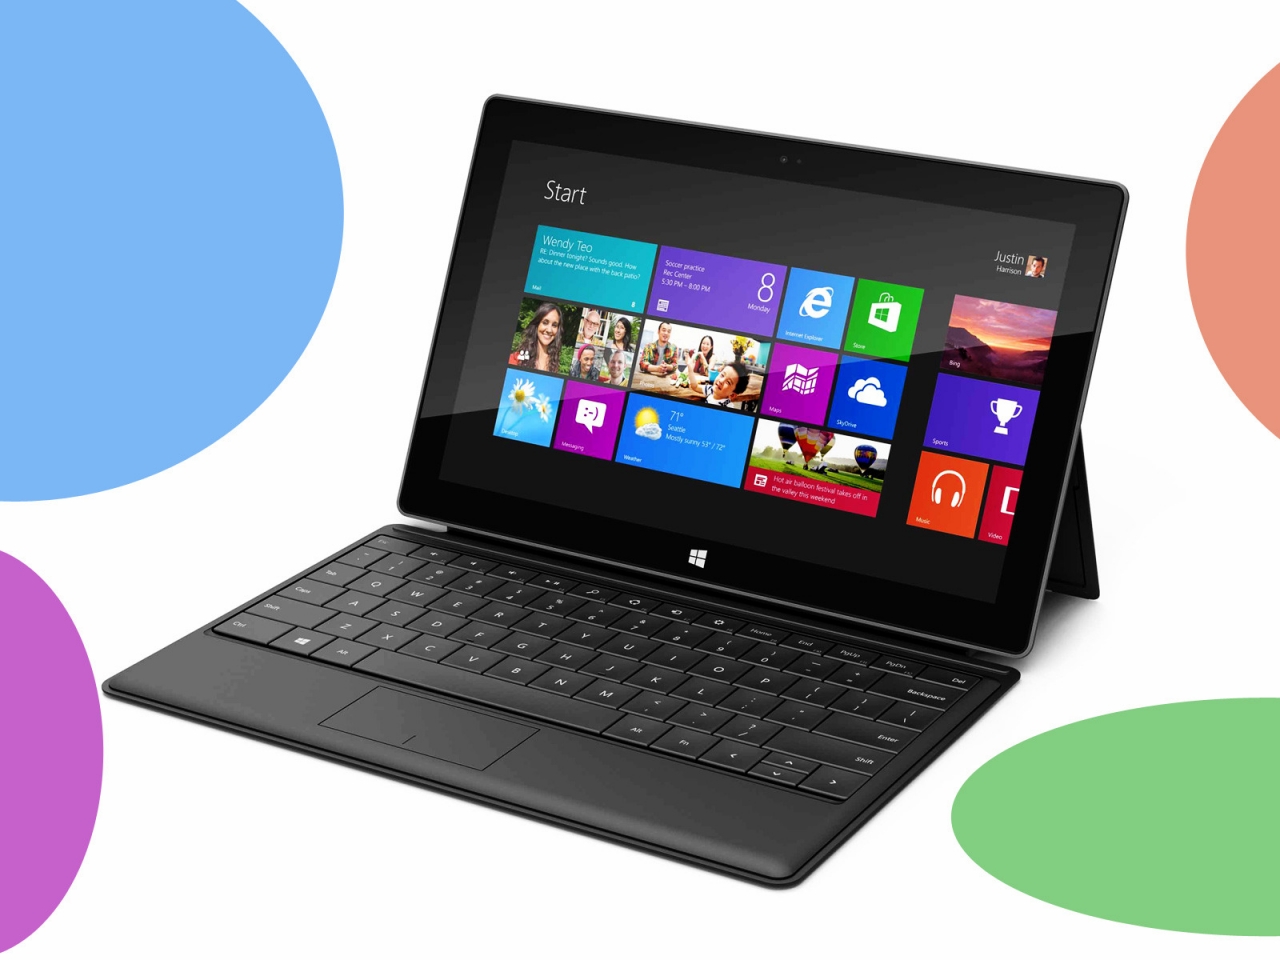 Microsoft Surface Tablet for 1280 x 960 resolution